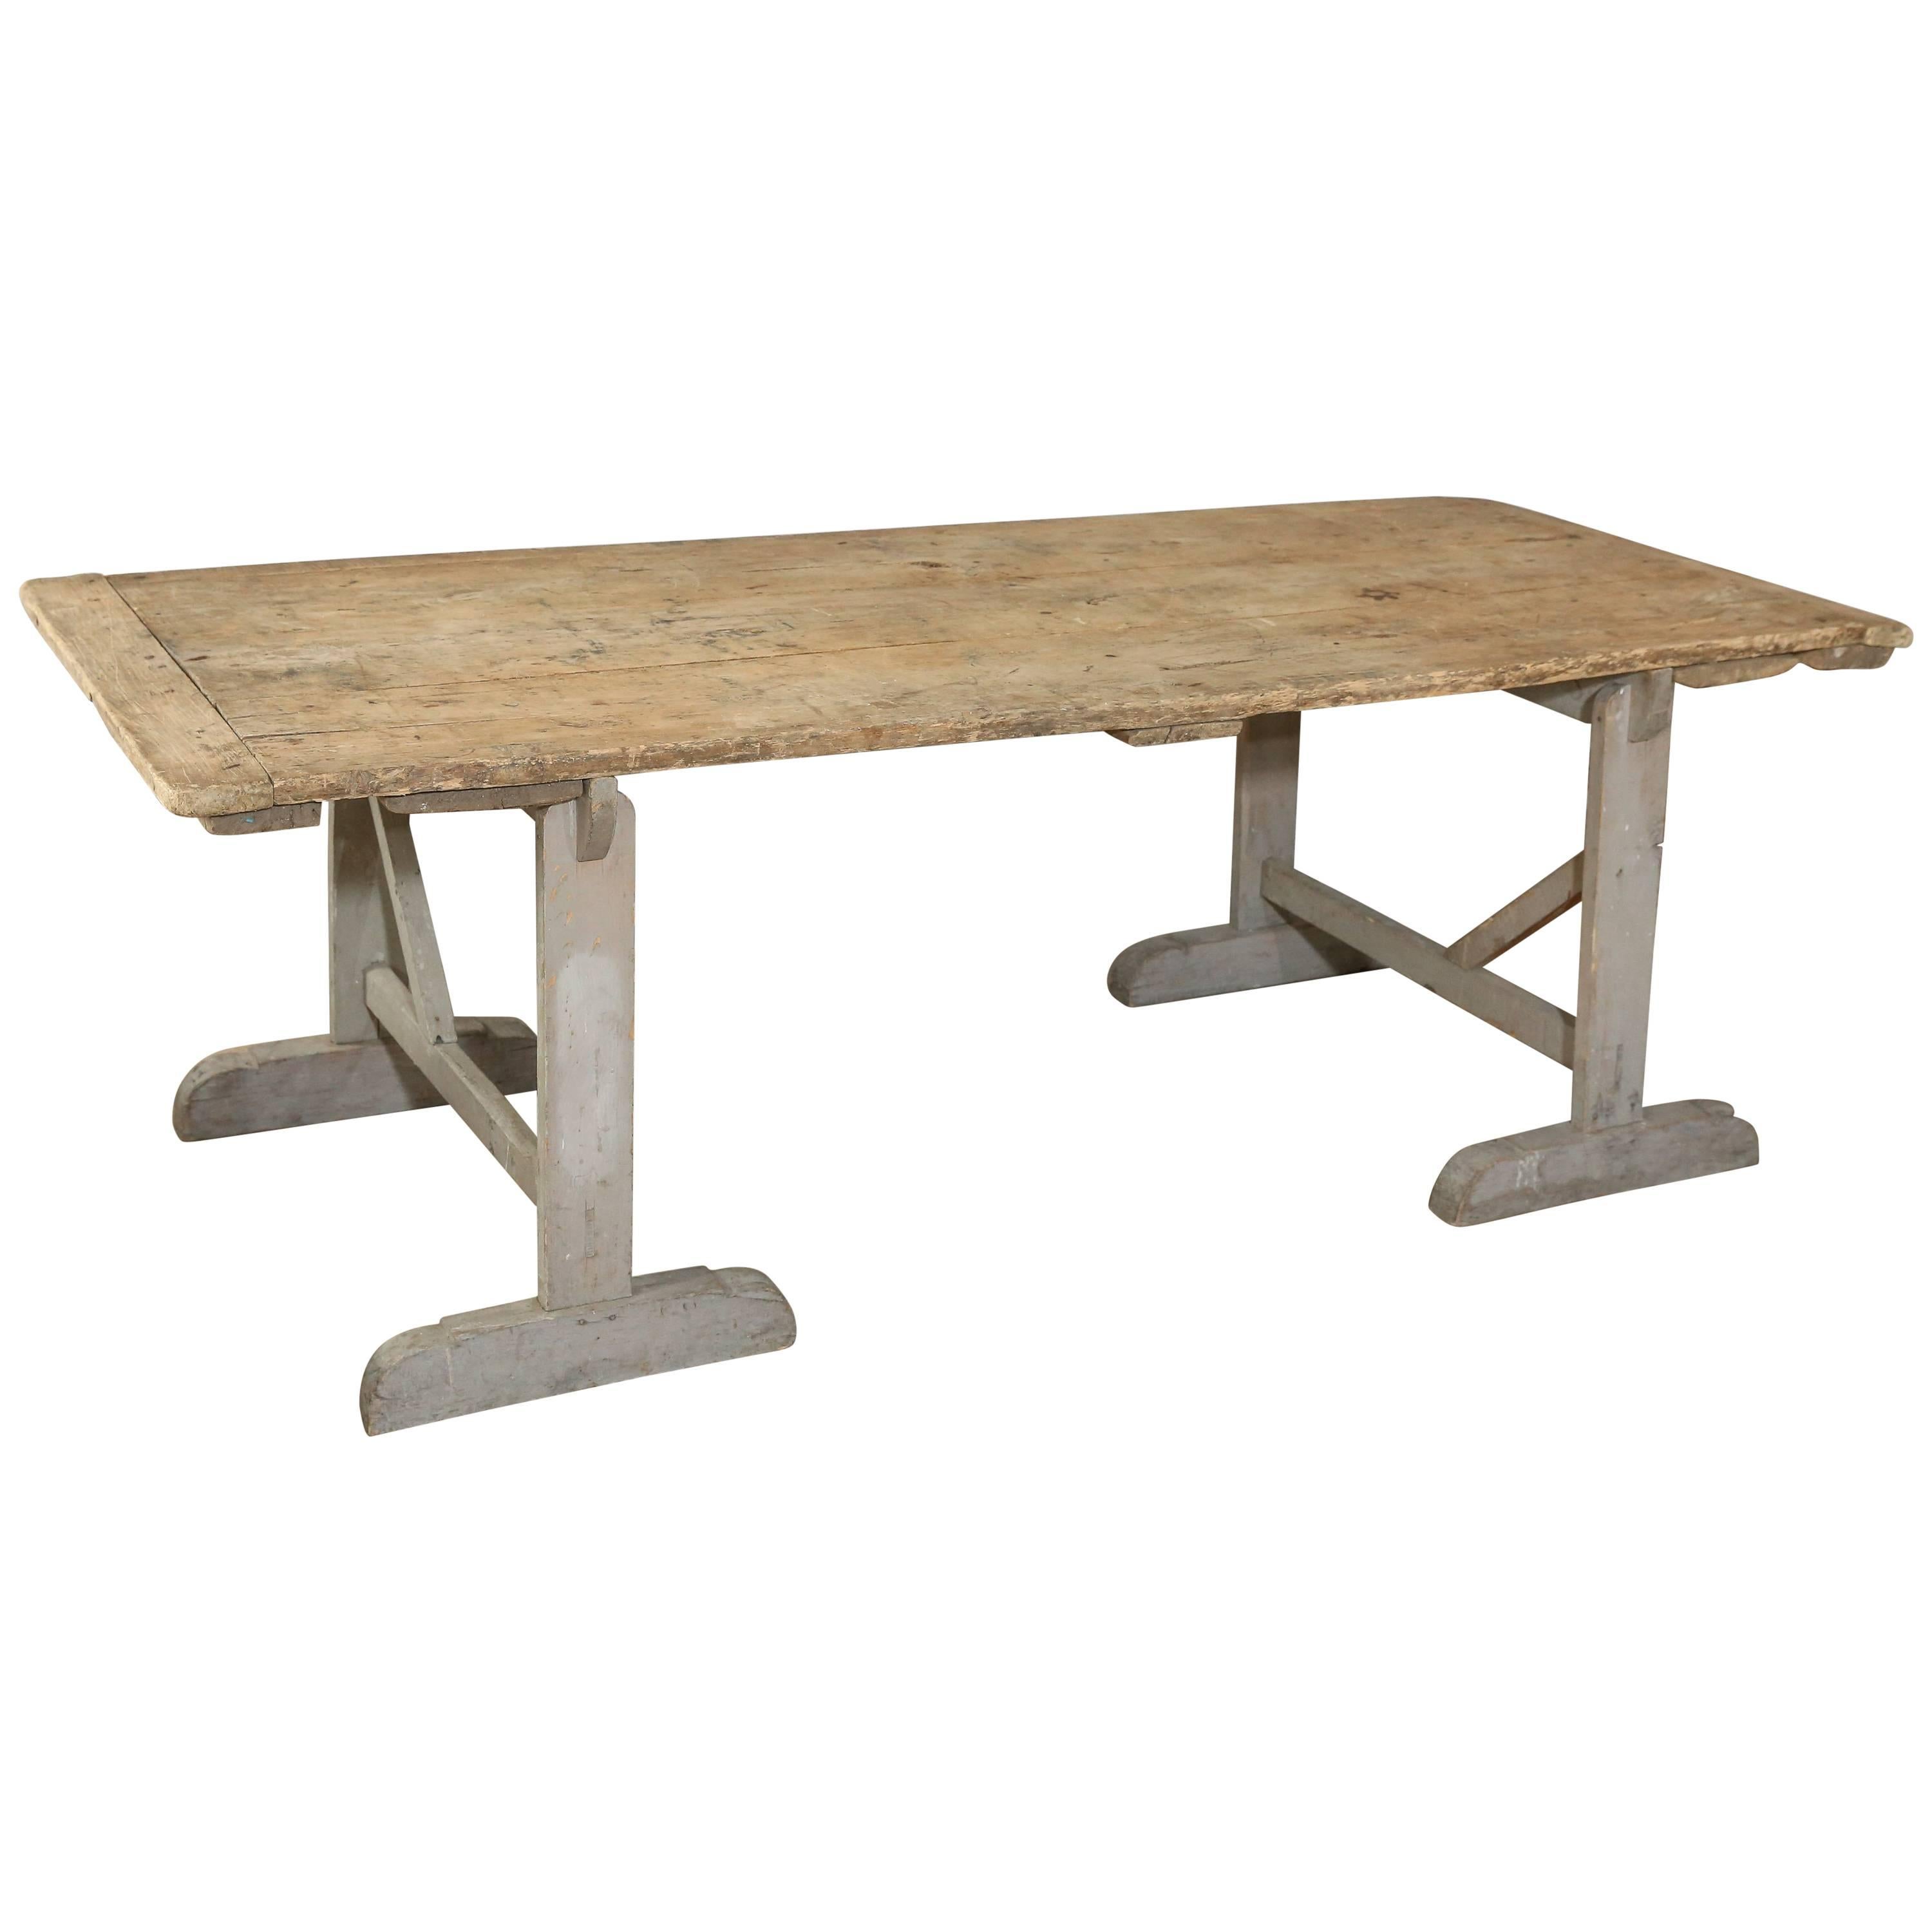 Rustic French Sawhorse Table